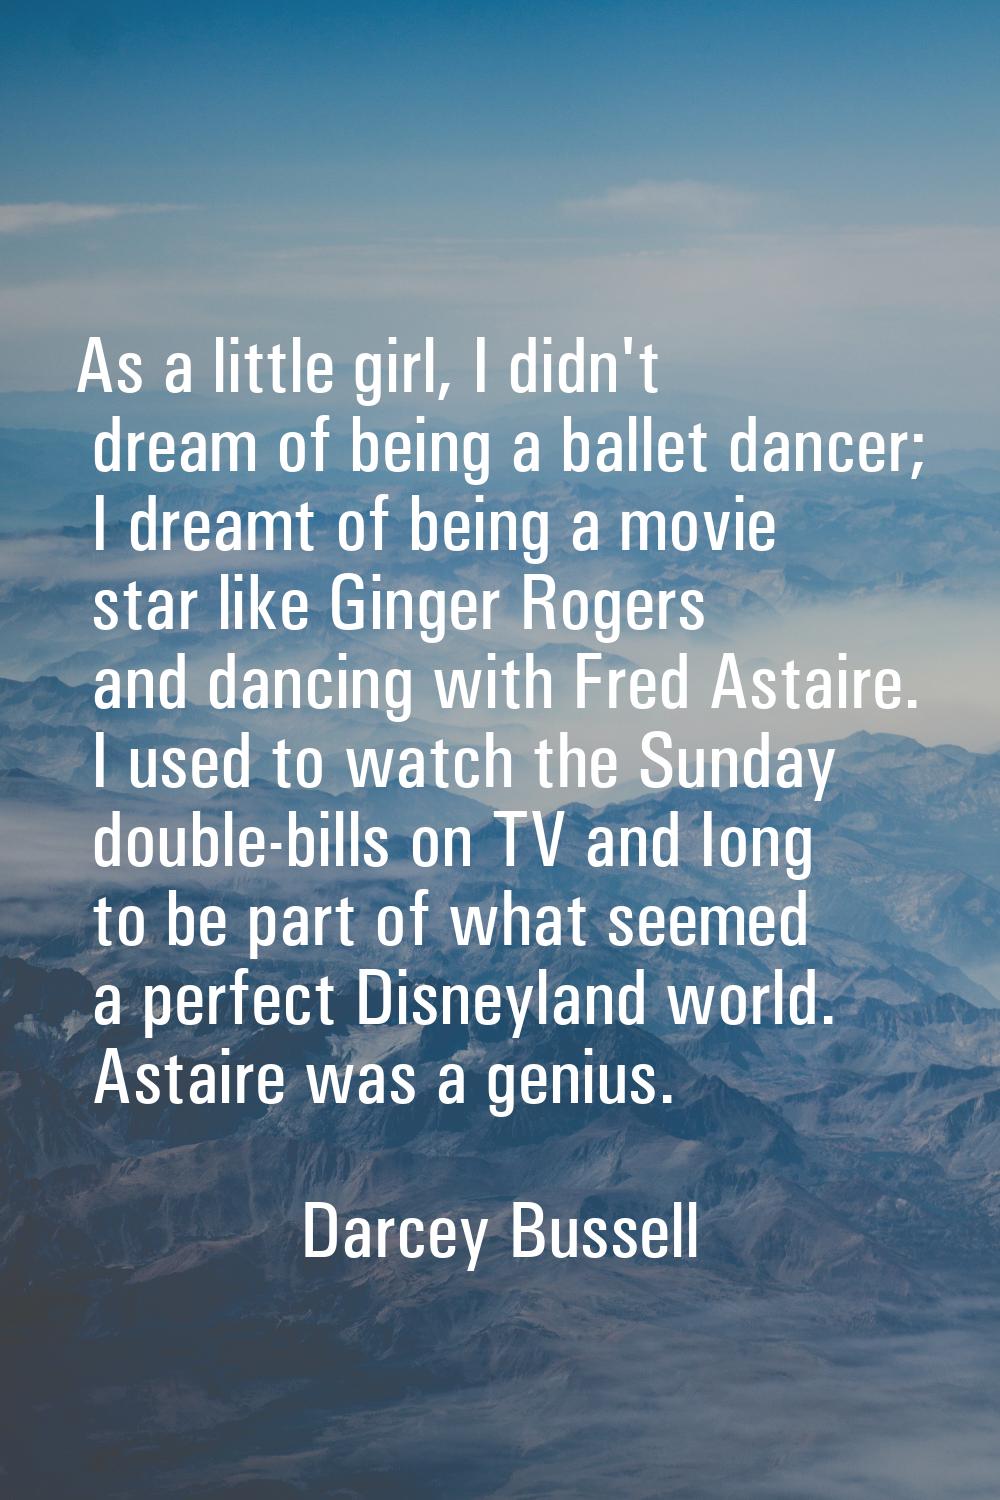 As a little girl, I didn't dream of being a ballet dancer; I dreamt of being a movie star like Ging